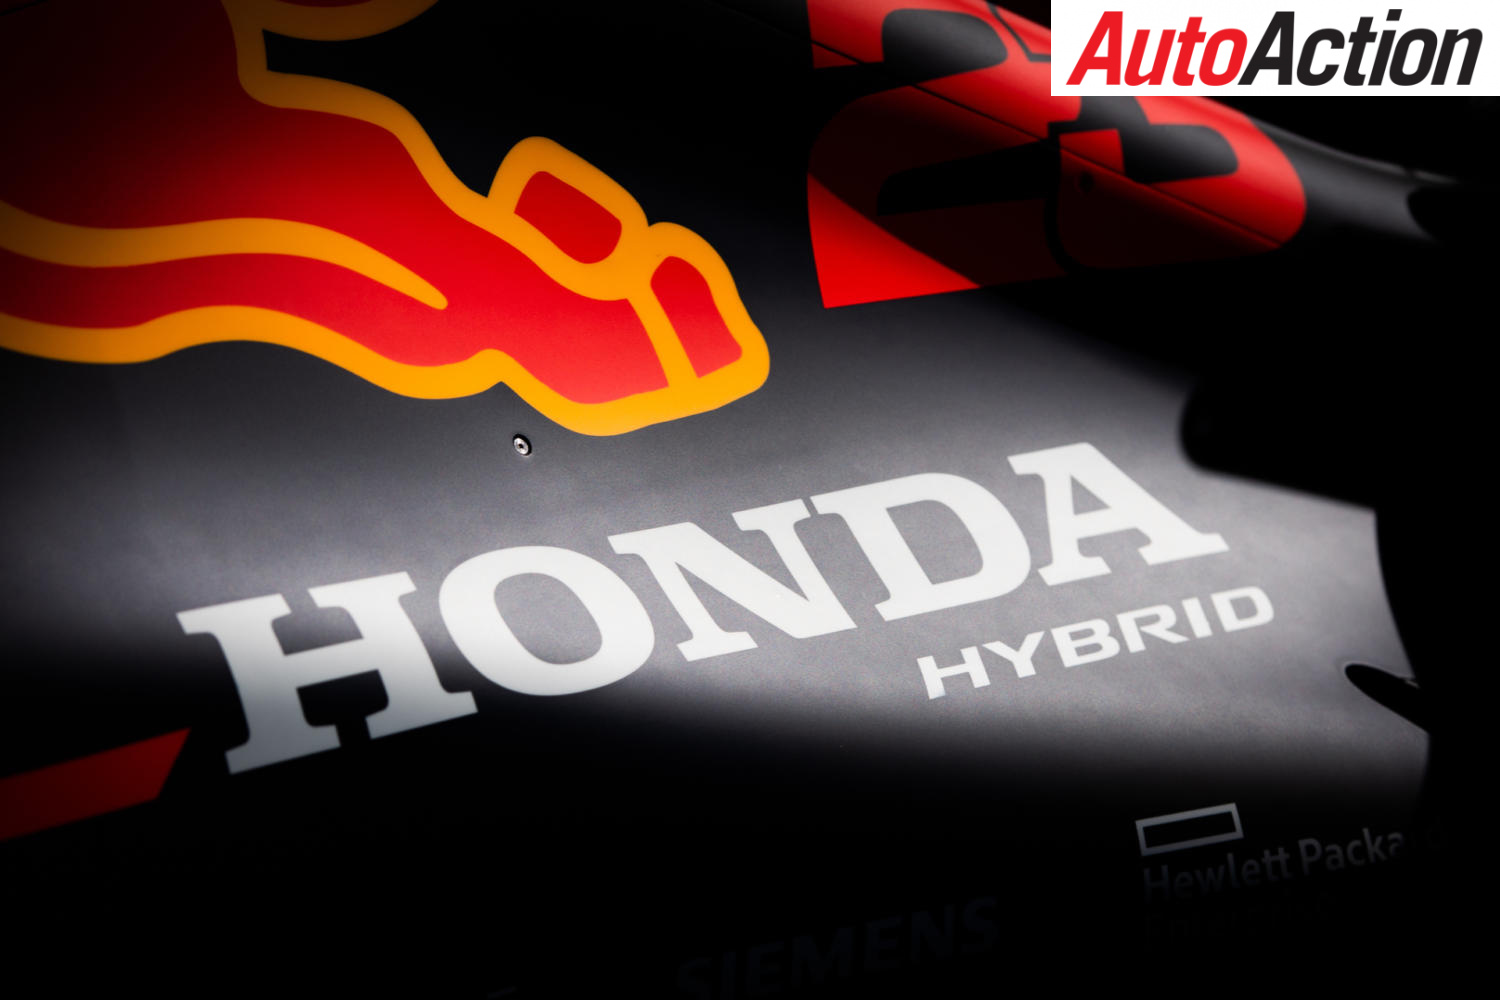 Red Bull Takes Over Honda F1 Project Image Suttons Auto Action